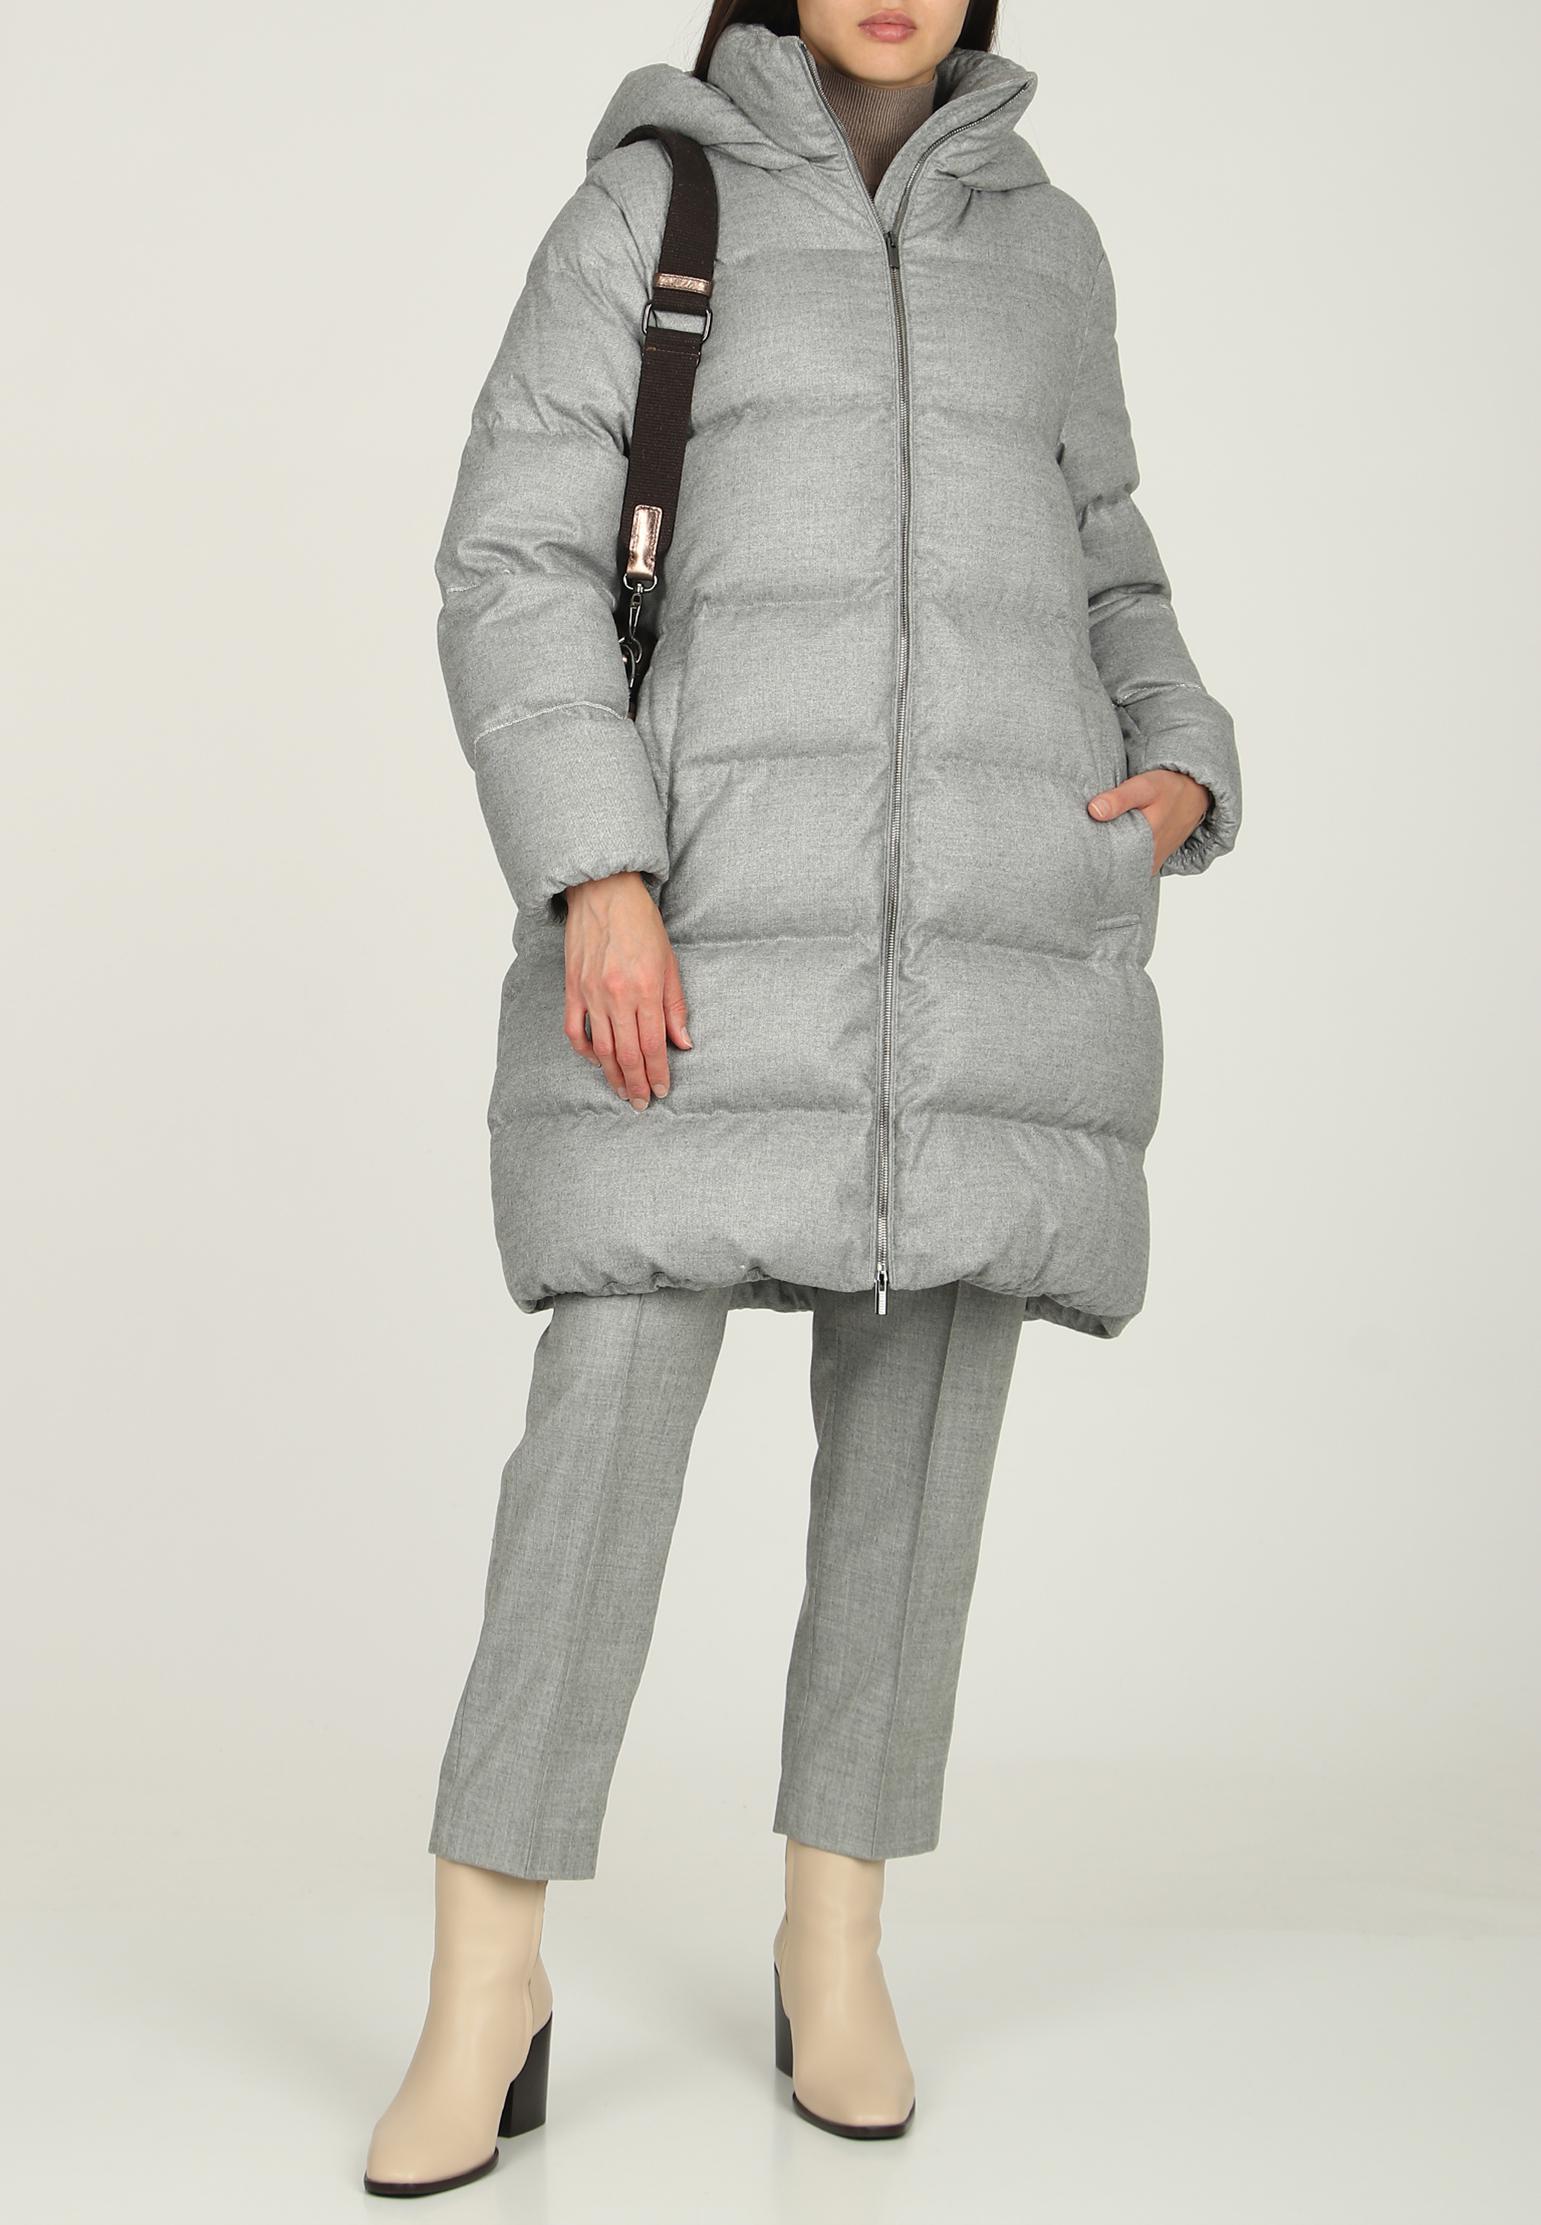 Down jacket with stand-up collar, Peserico, RUB 195,900.  (elyts.ru)